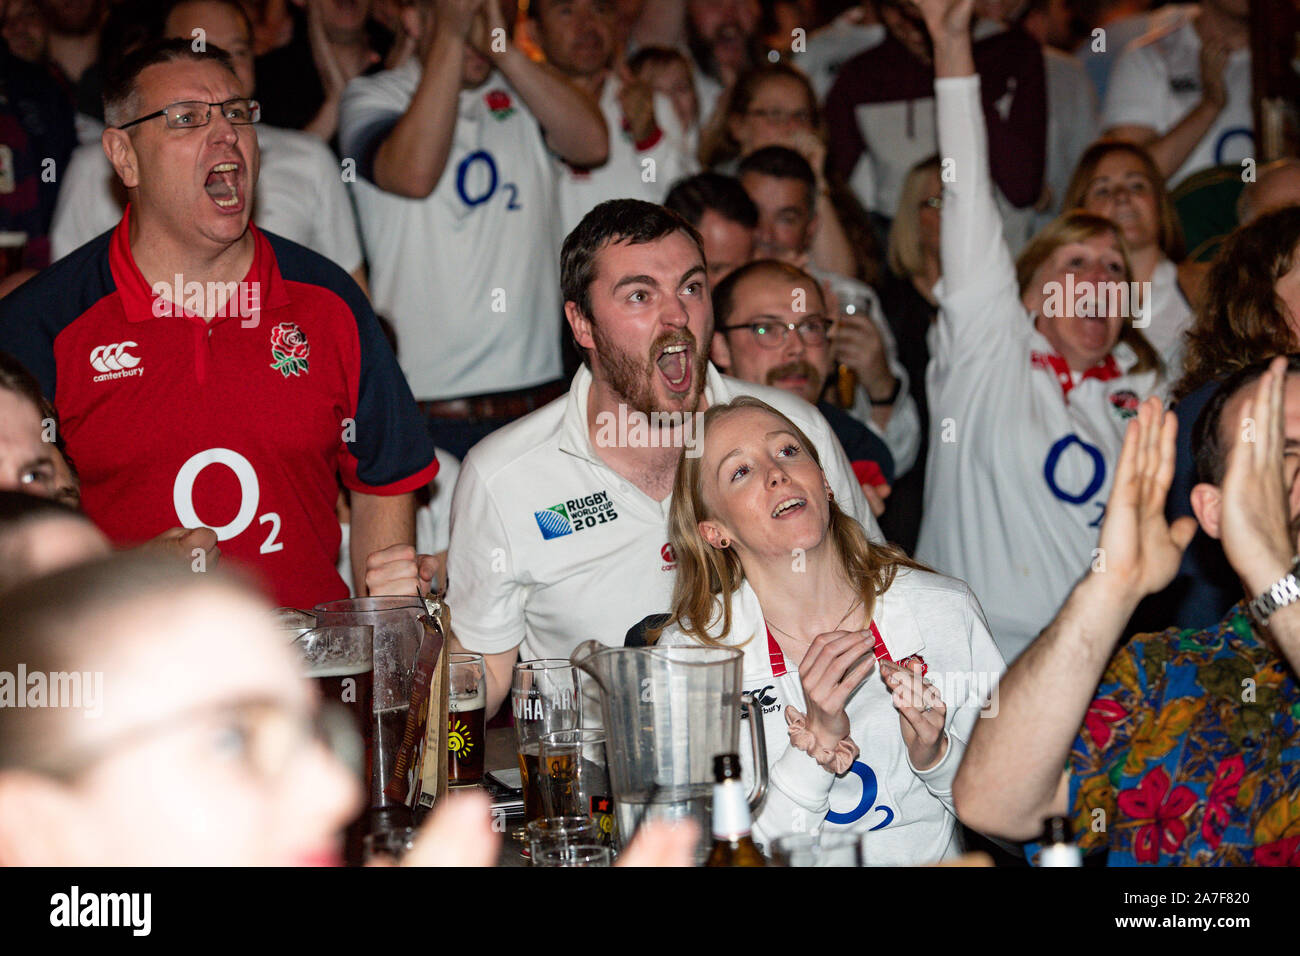 England fans react during a screening of the Rugby World Cup Final at The Merchants Inn in Rugby, Warwickshire. PA Photo. Picture date: Saturday 2nd November 2019. See PA story SPORT Rugby. Photo credit should read: Jacob King/PA Wire Stock Photo